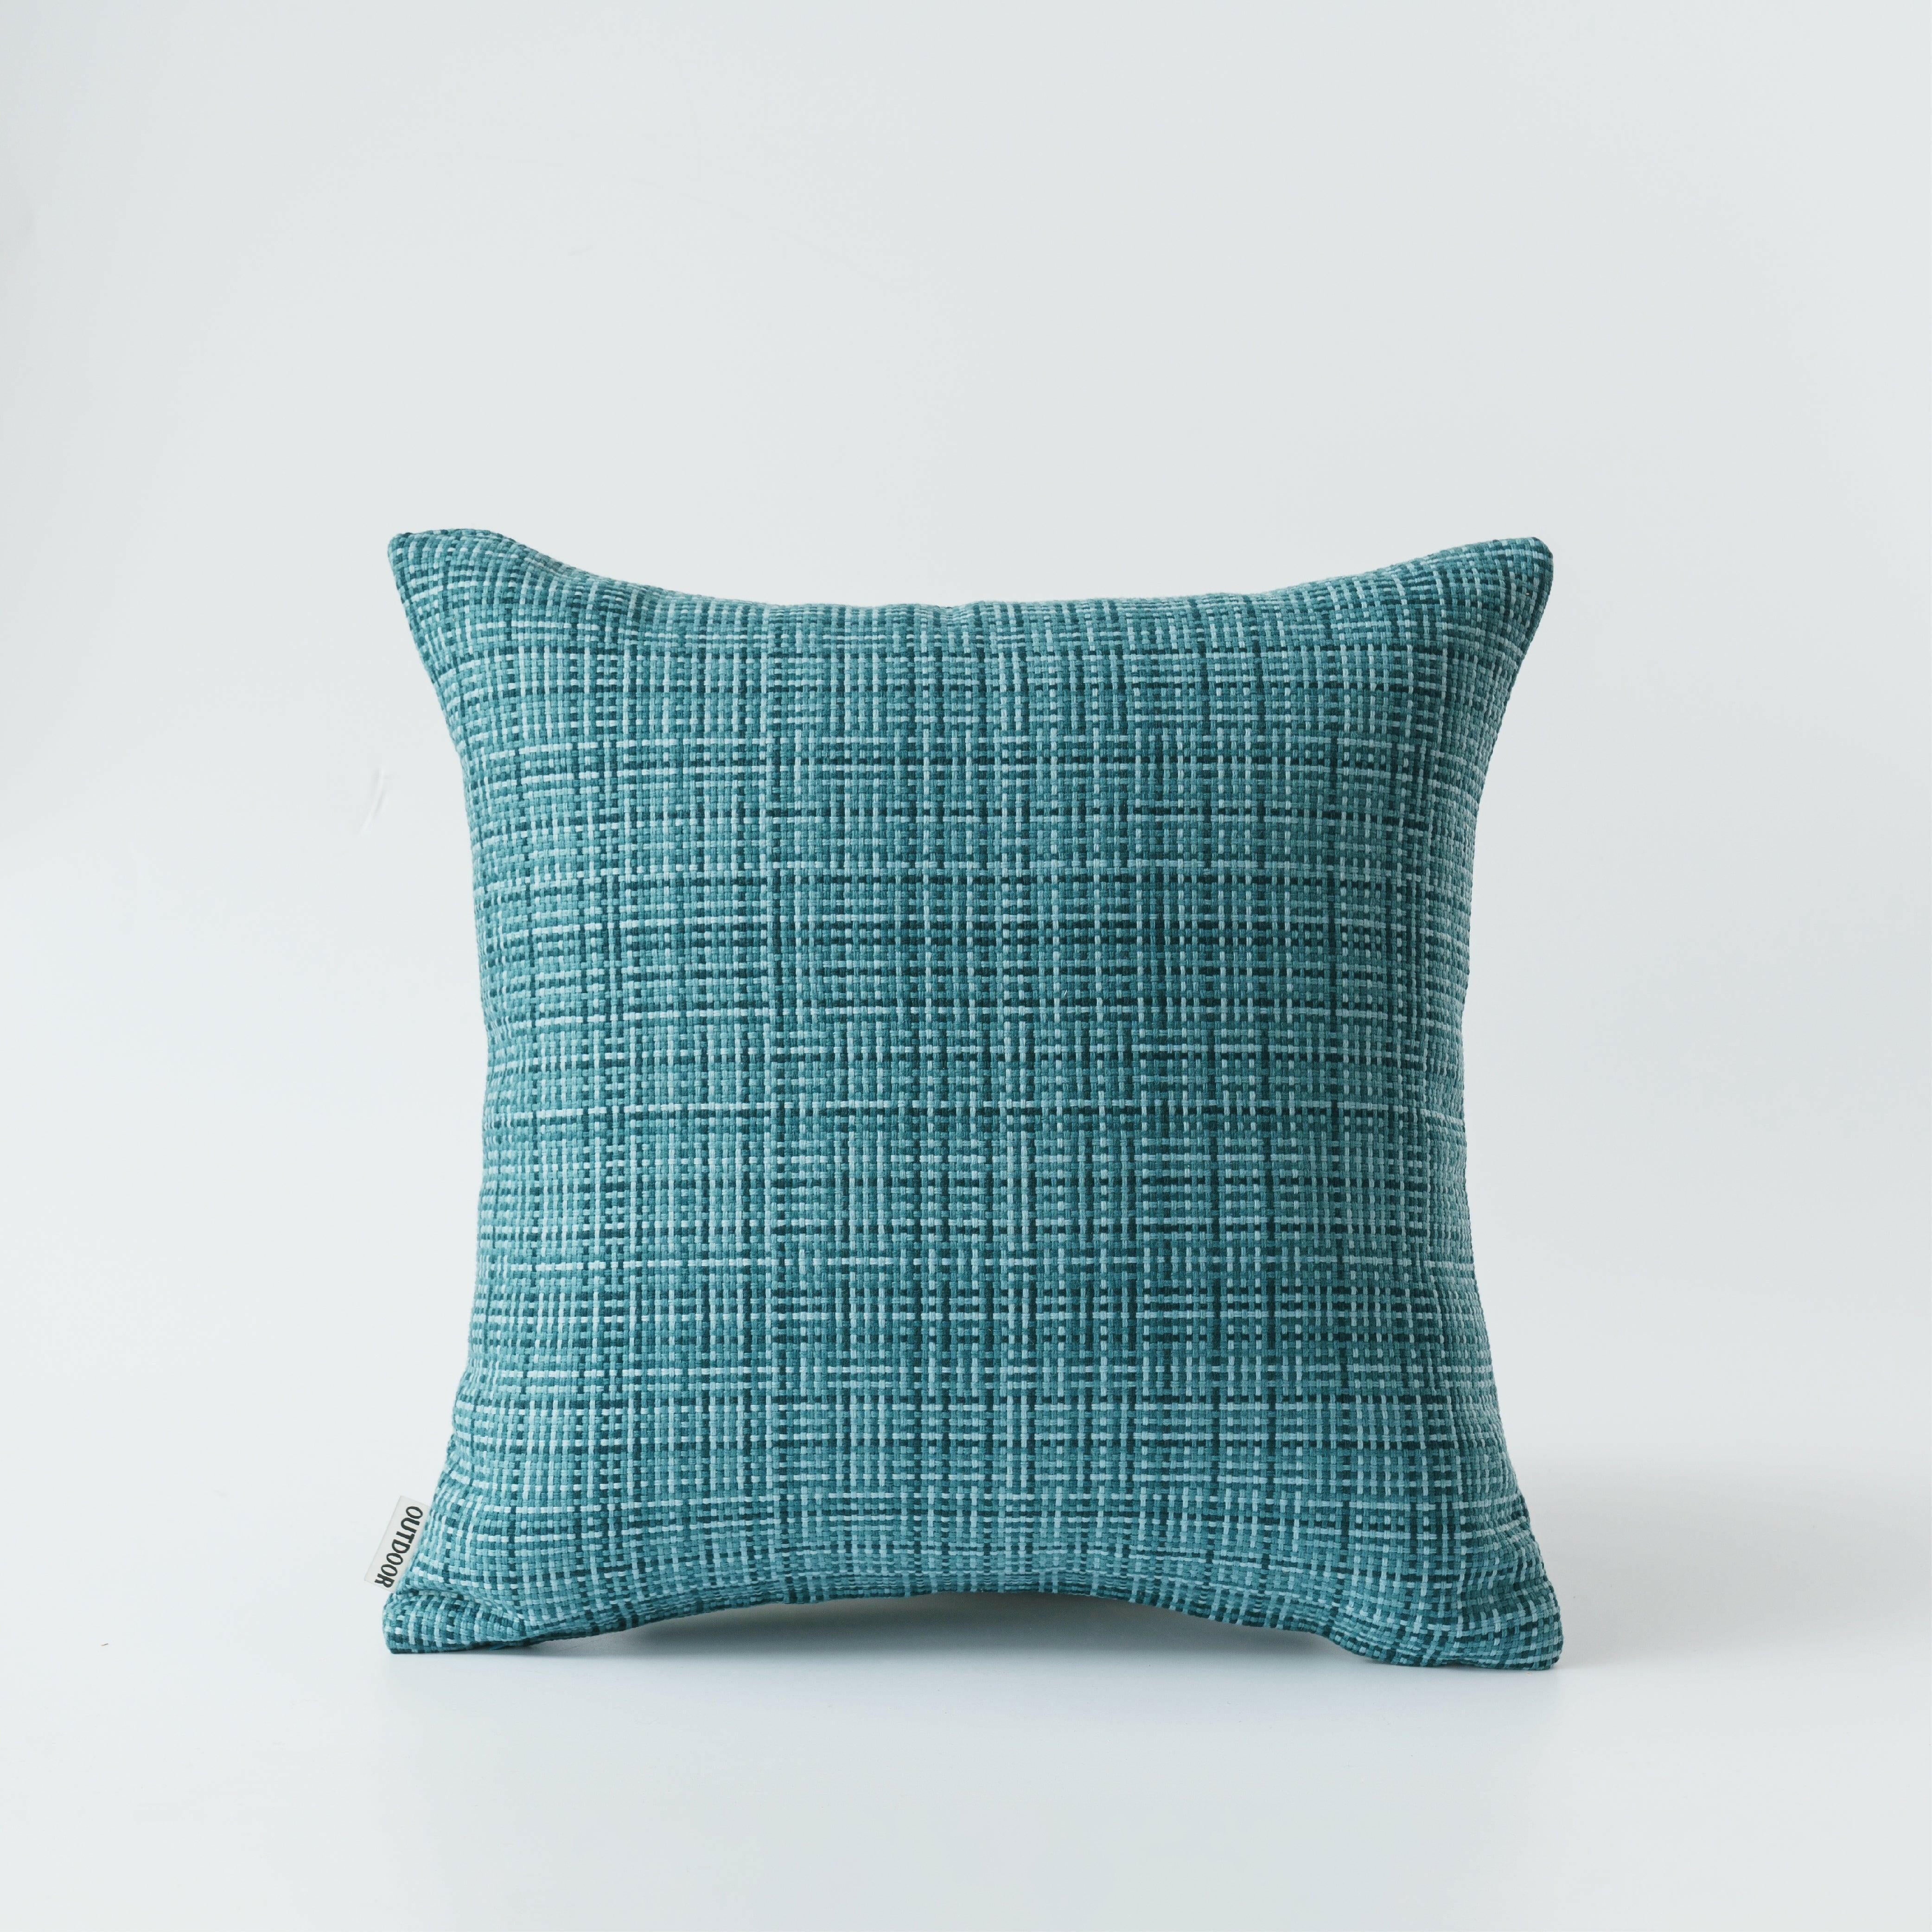 Hyper Cover Weave Outdoor Cushion Covers | Cushion Covers | Brilliant Home Living